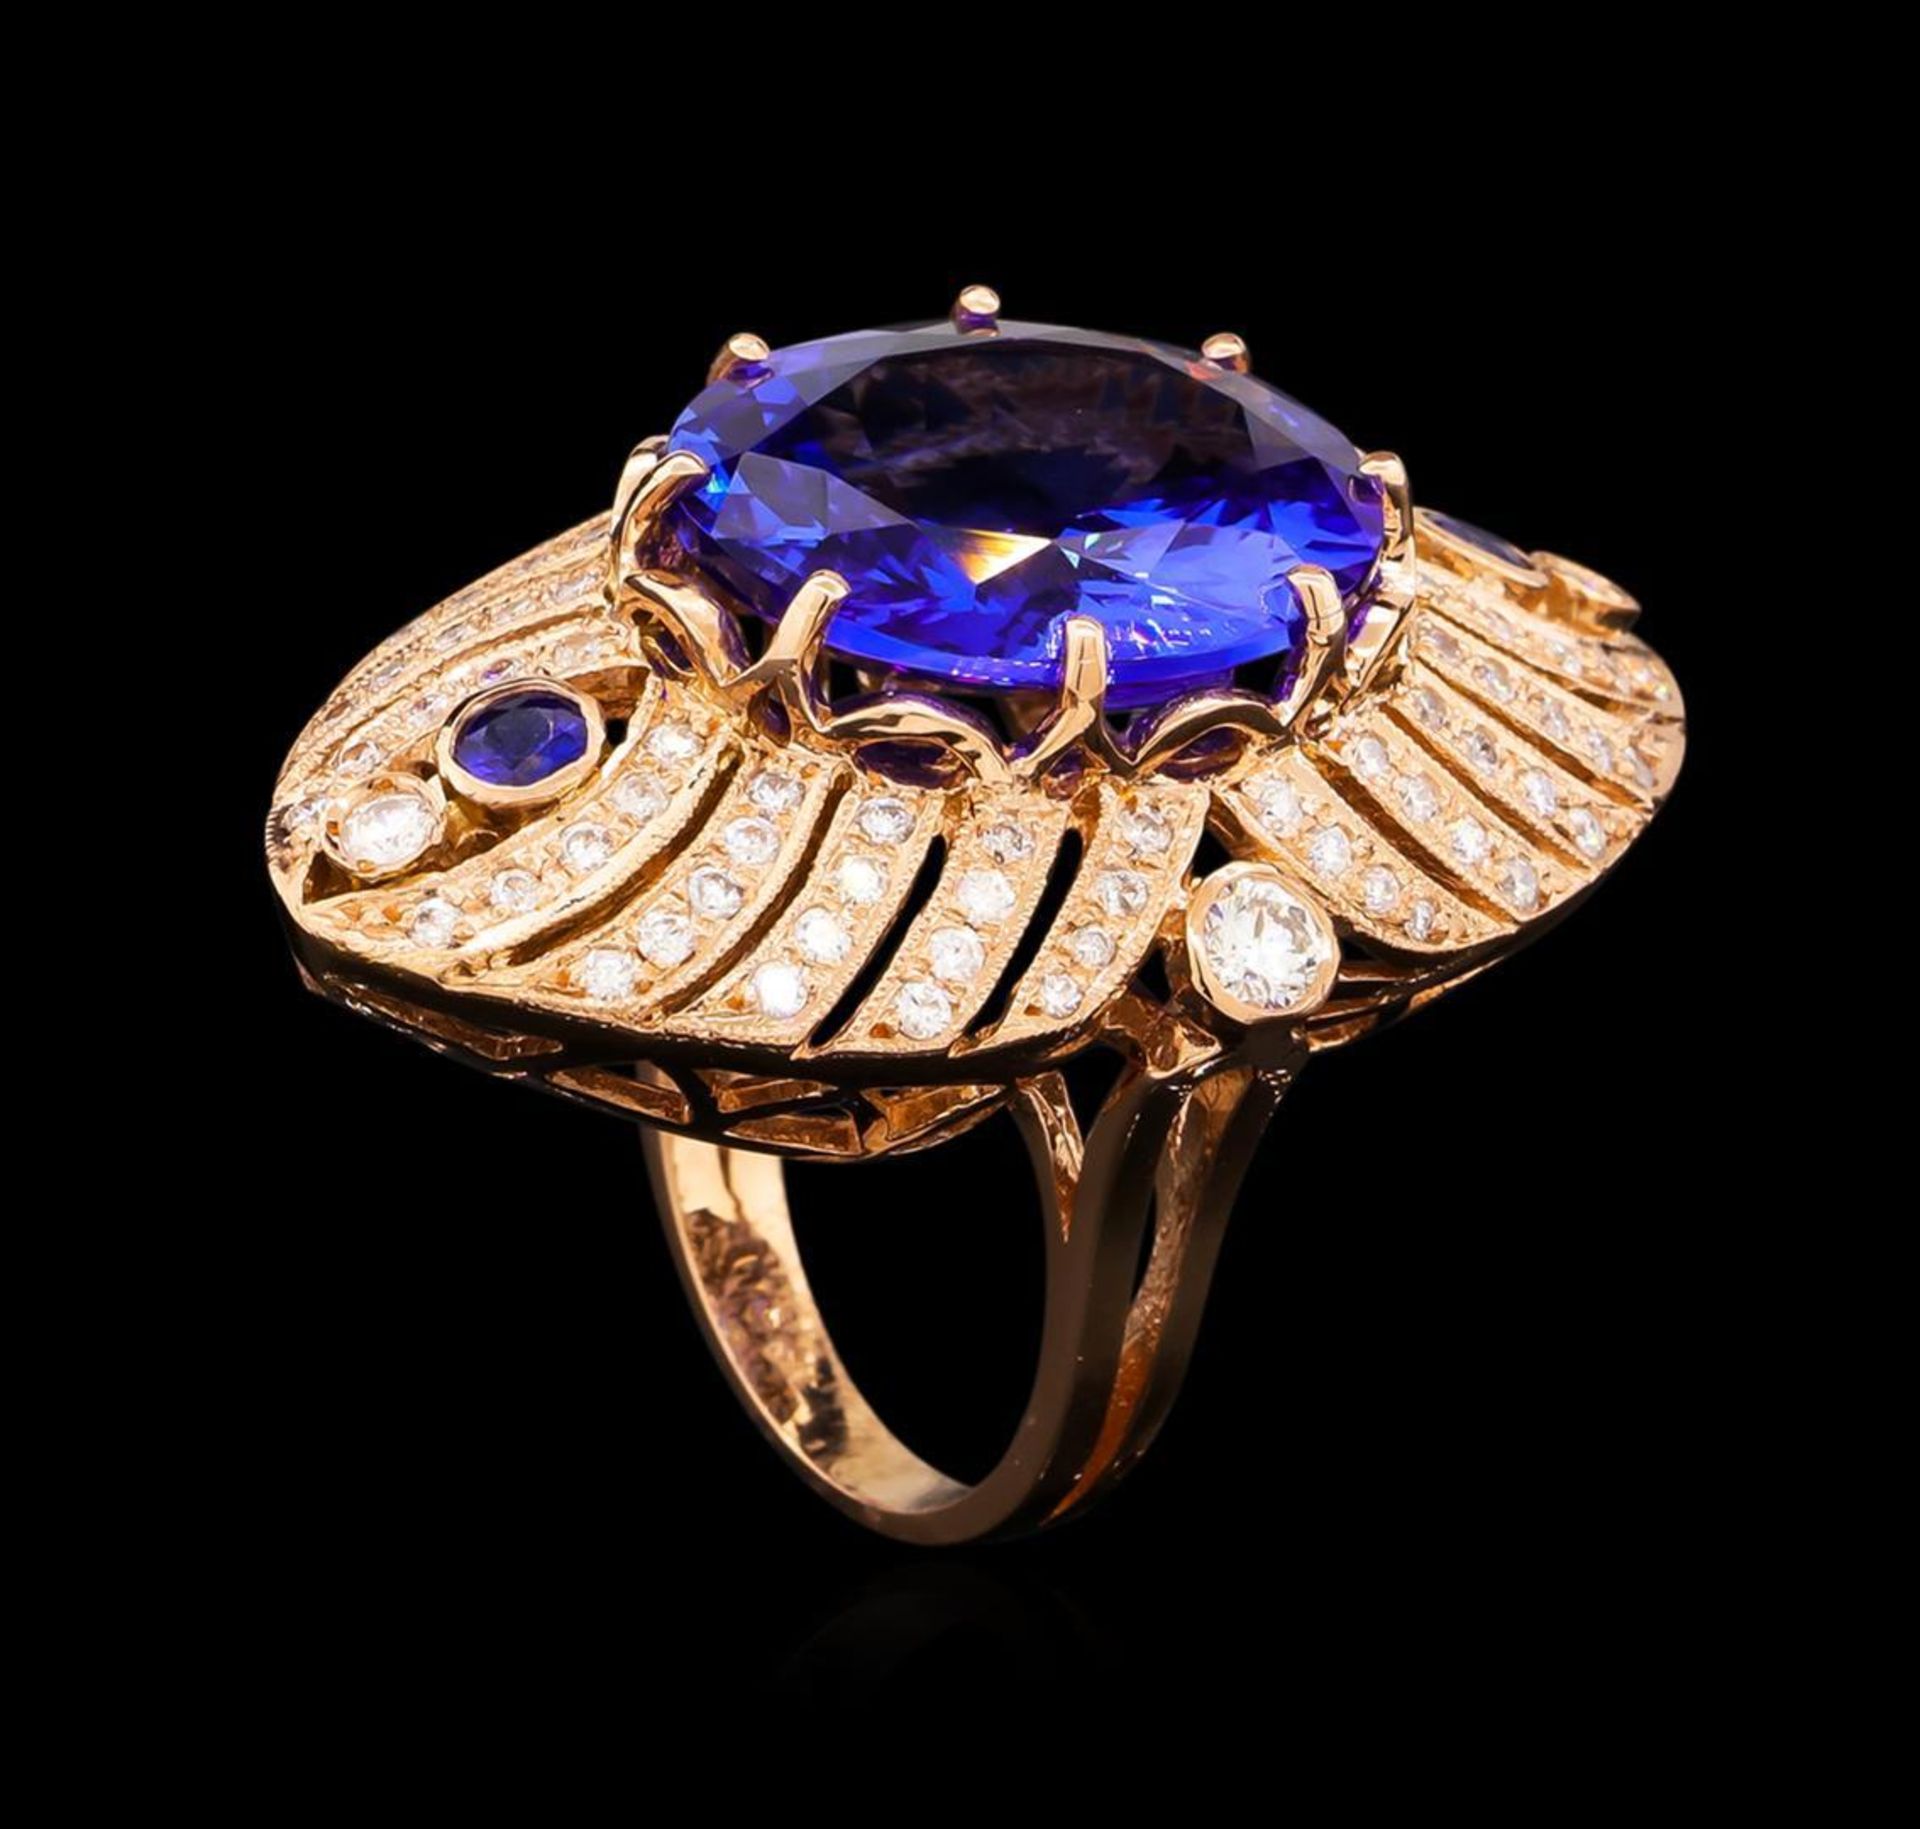 15.02 ctw Tanzanite, Sapphire and Diamond Ring - 14KT Rose Gold - Image 4 of 6